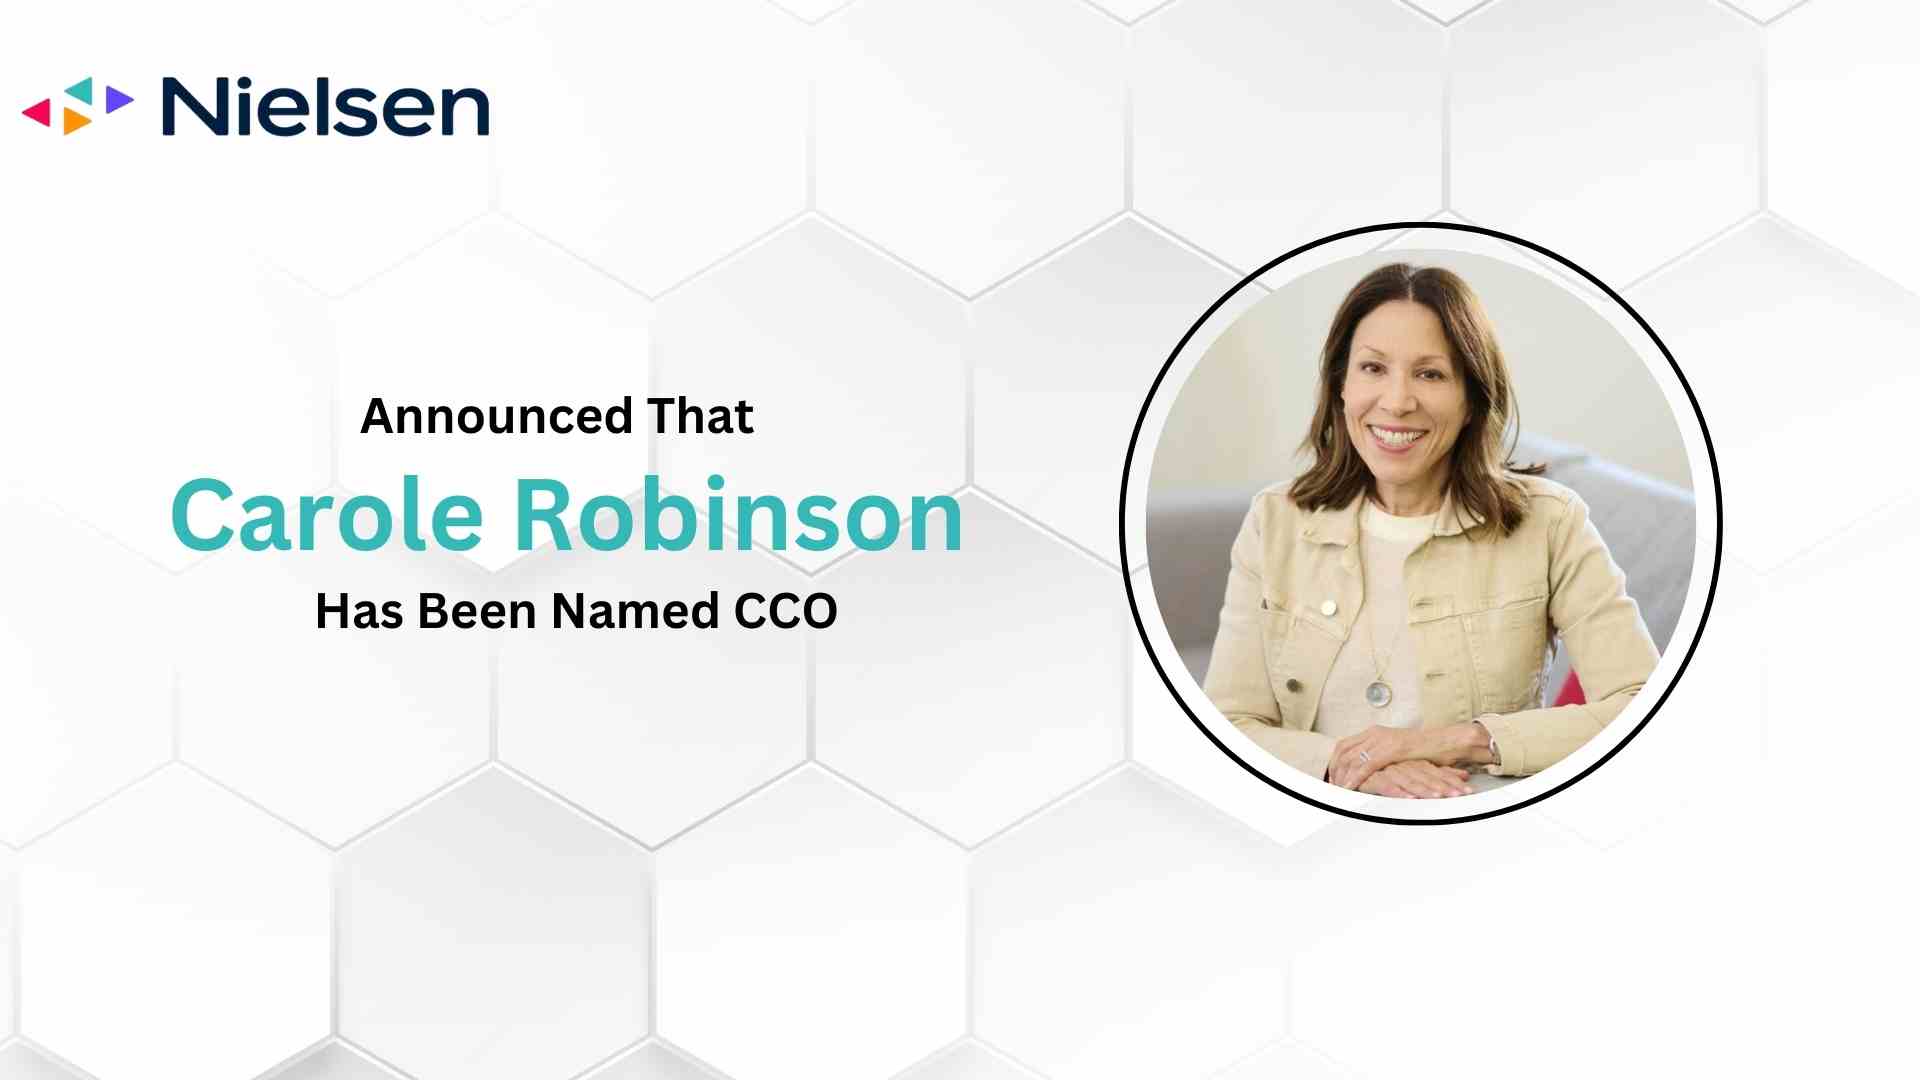 Carole Robinson named Chief Communications Officer of Nielsen